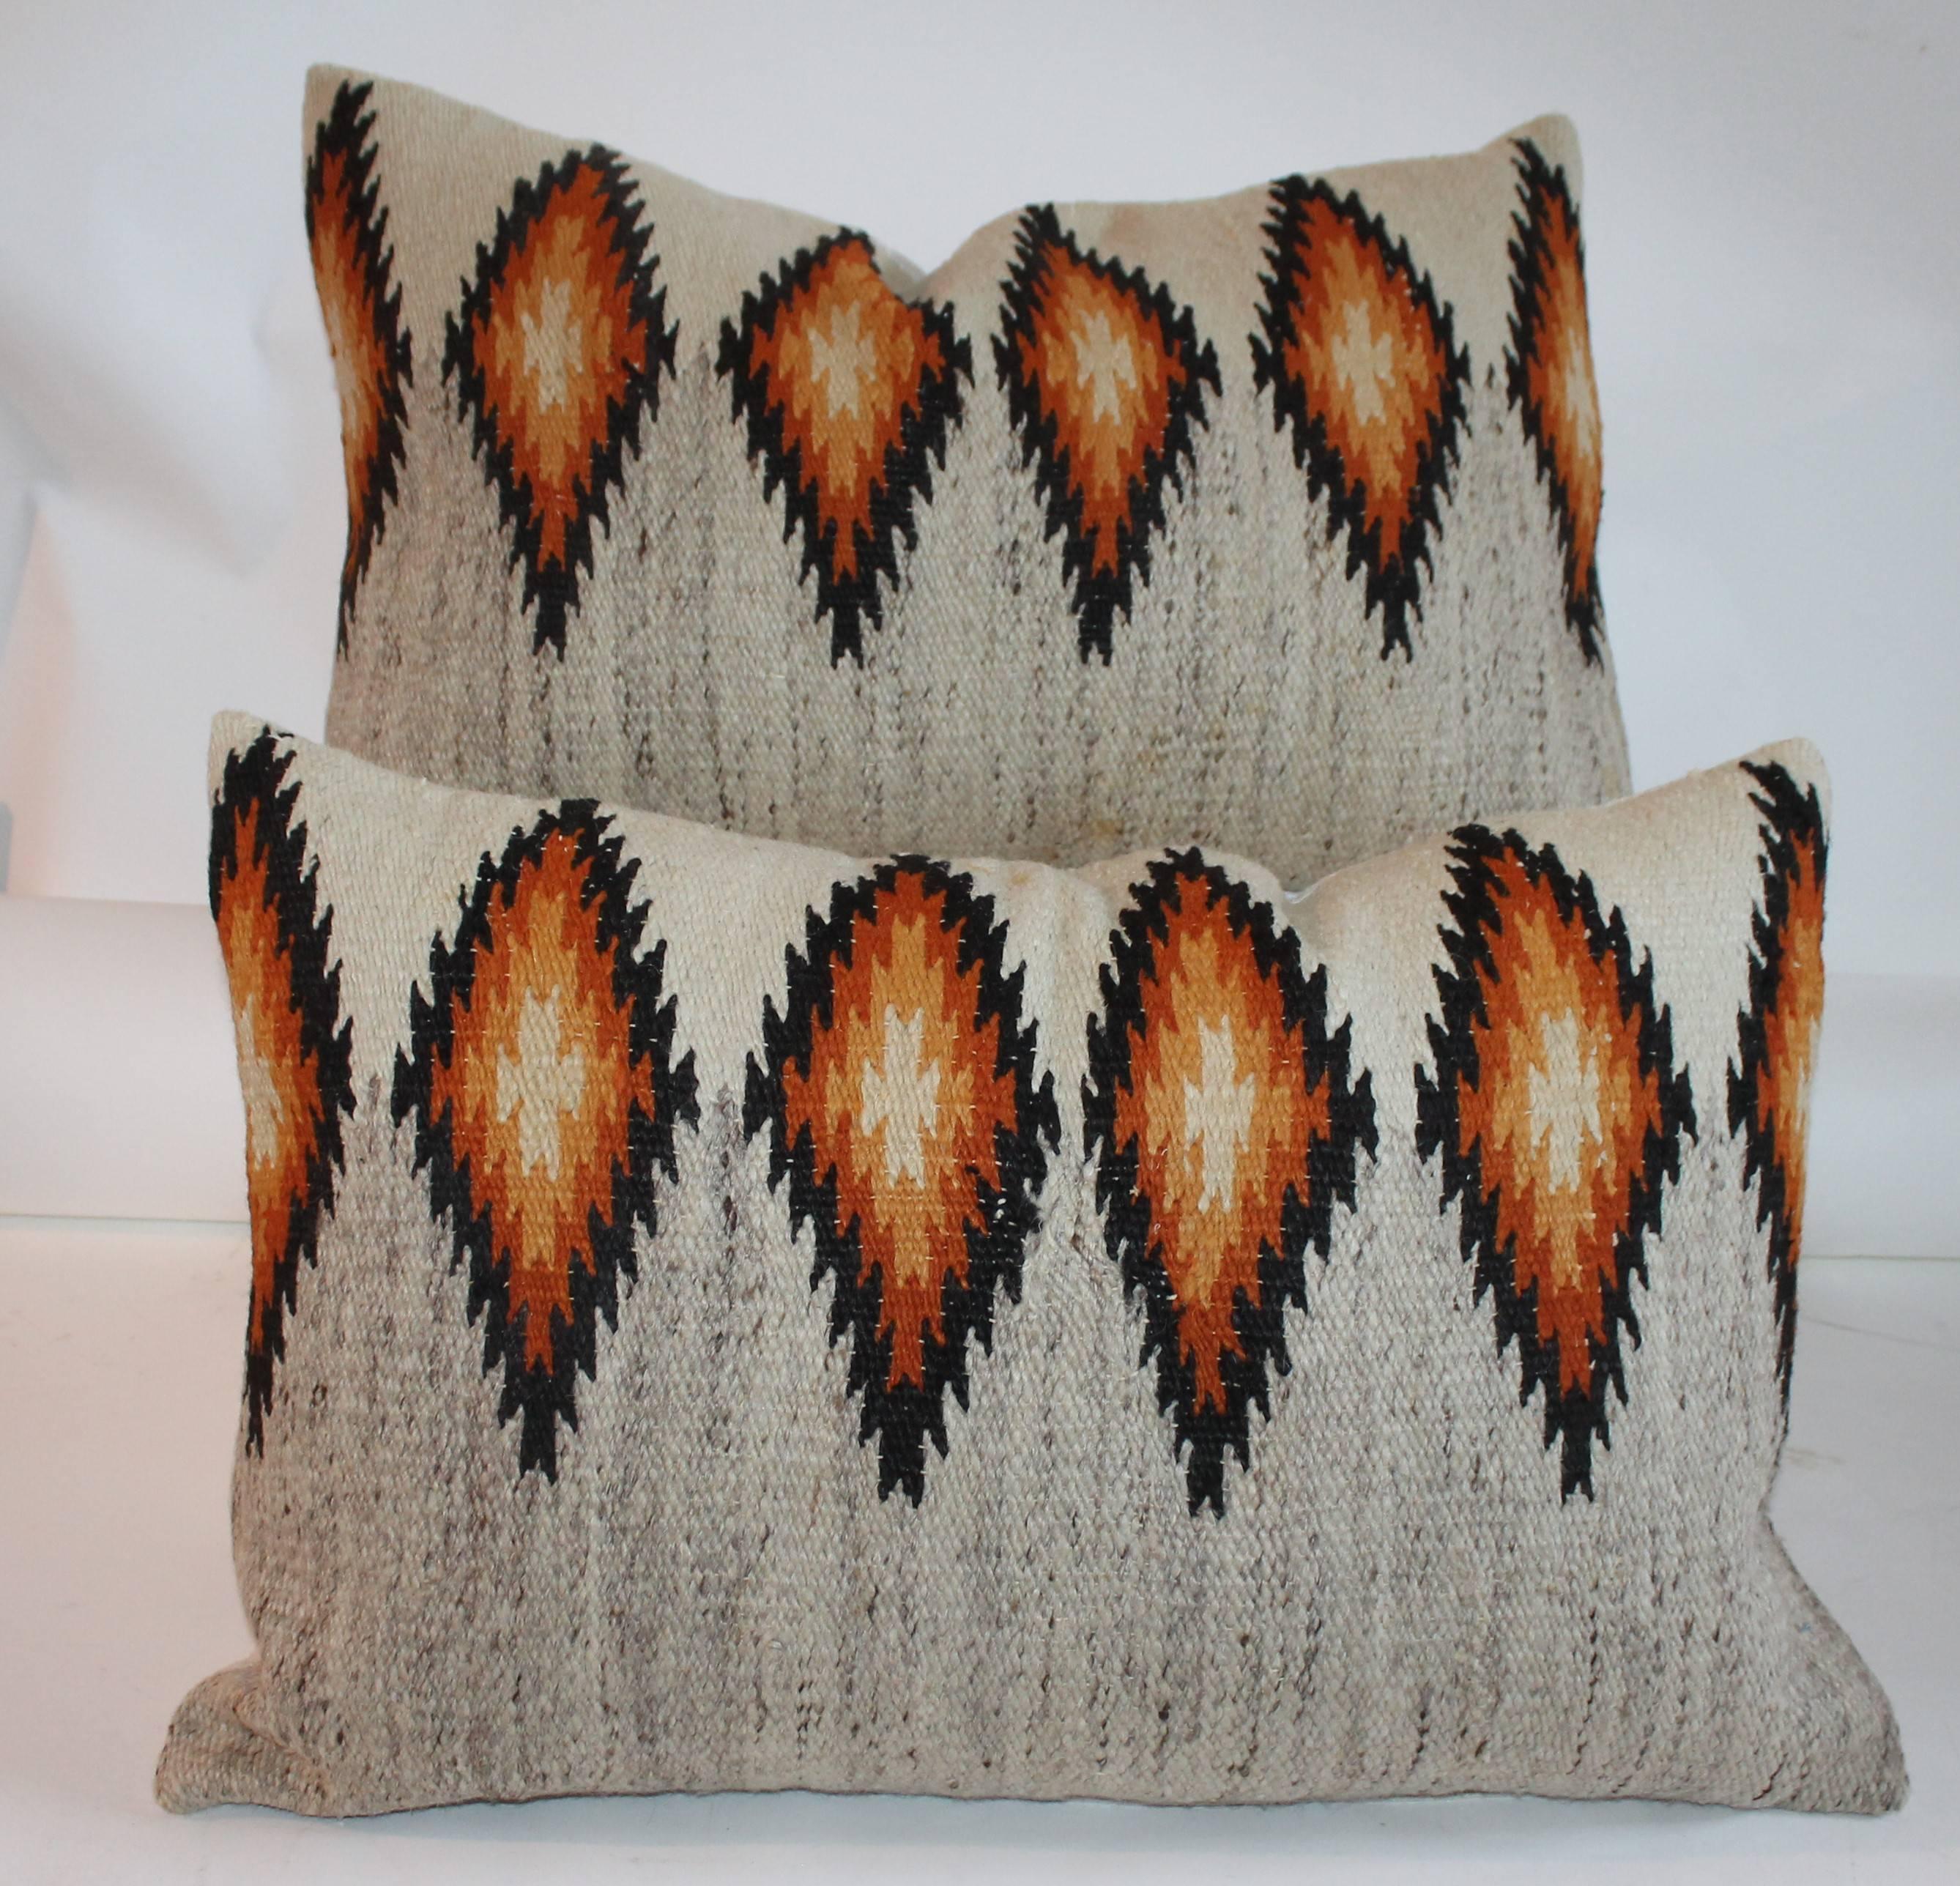 These fine geometric eye dazzler pillows are in a golden rod color and trimmed in black. The back ground is in a natural color. The backing is in natural cotton linen. Down and feather fill.